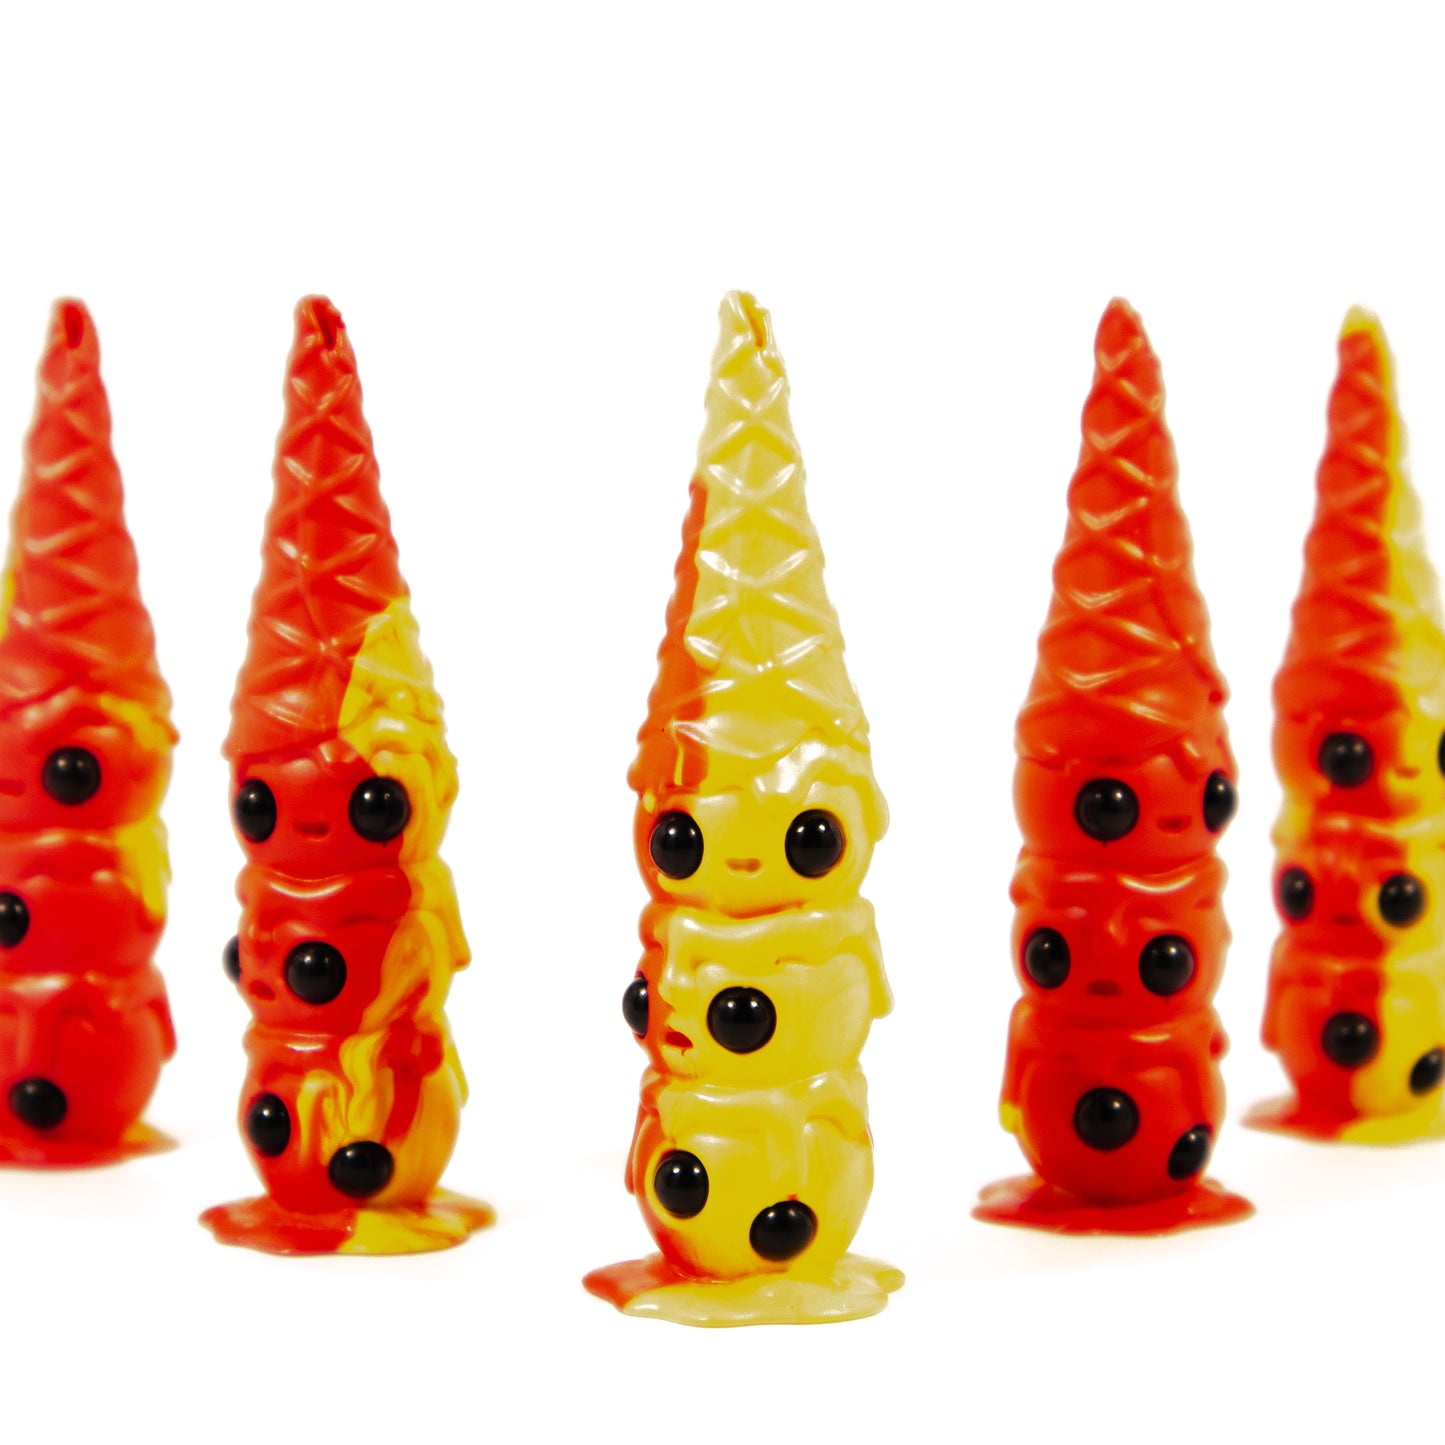 This is Wafull Ketchup & Mustard Limited Edition Resin Figure